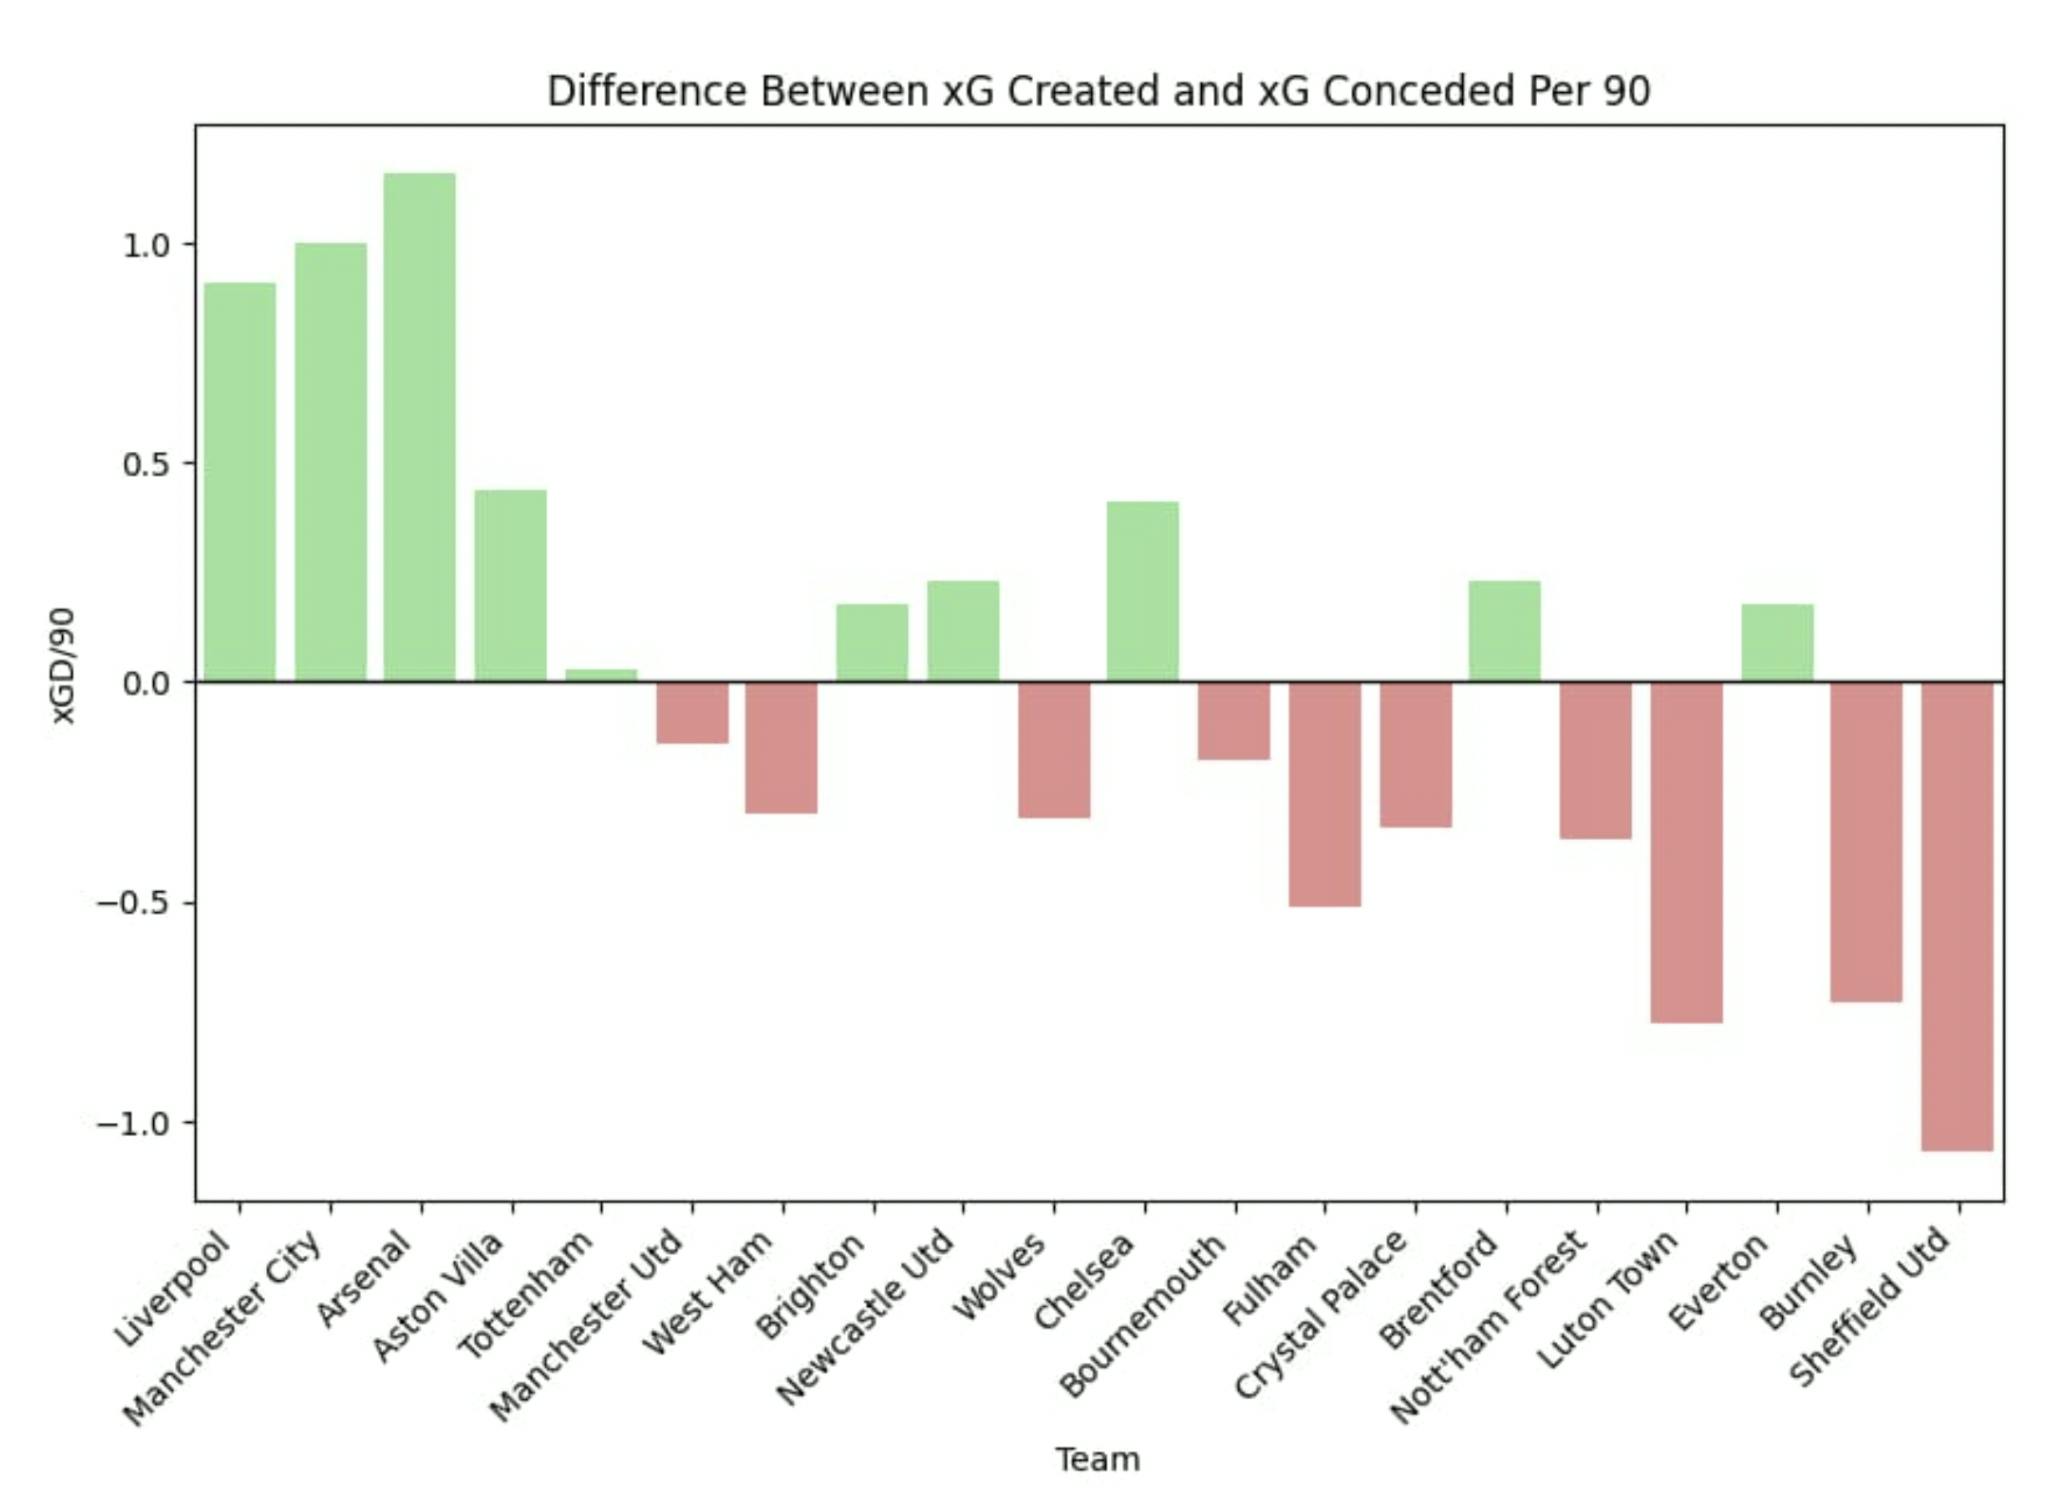 Difference Between xG Created and xG Conceded Per 90